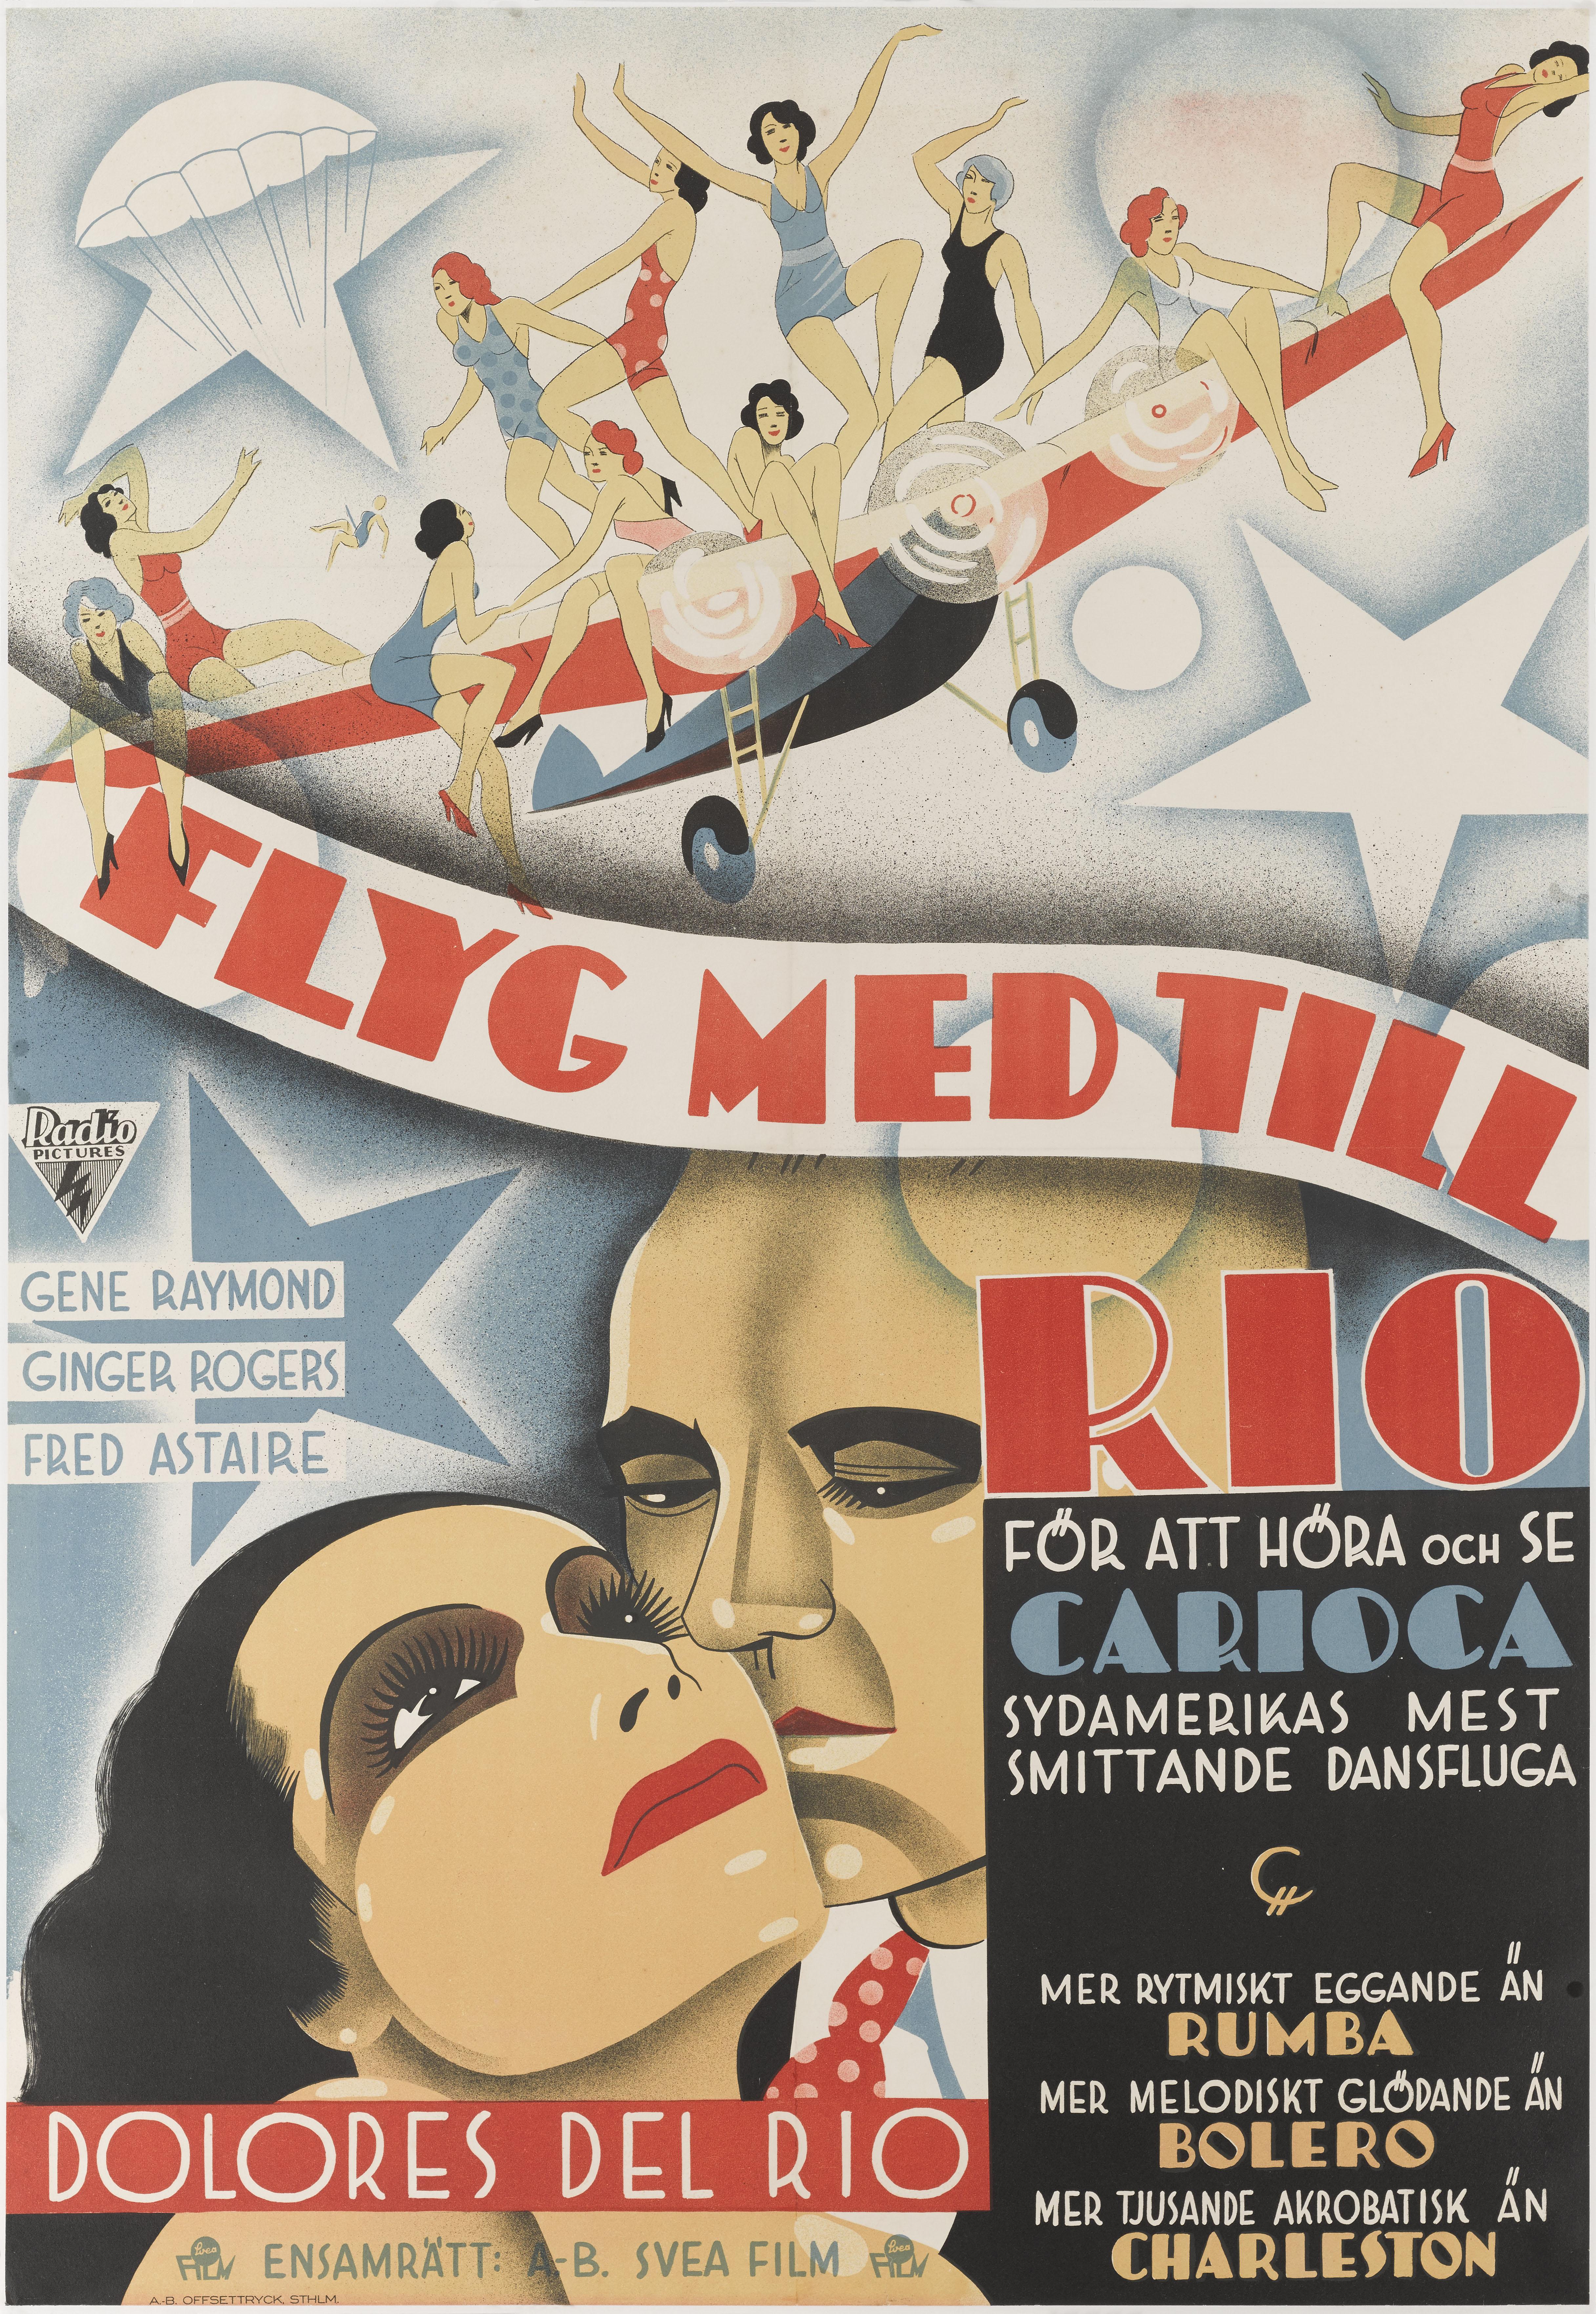 Original Swedish film poster .The legendary dancing partnership between
Ginger Rogers and Fred Astaire began with 1933’s Flying Down to Rio, a straightforwardly charming screen musical about an ill-starred romance. Though they only had supporting